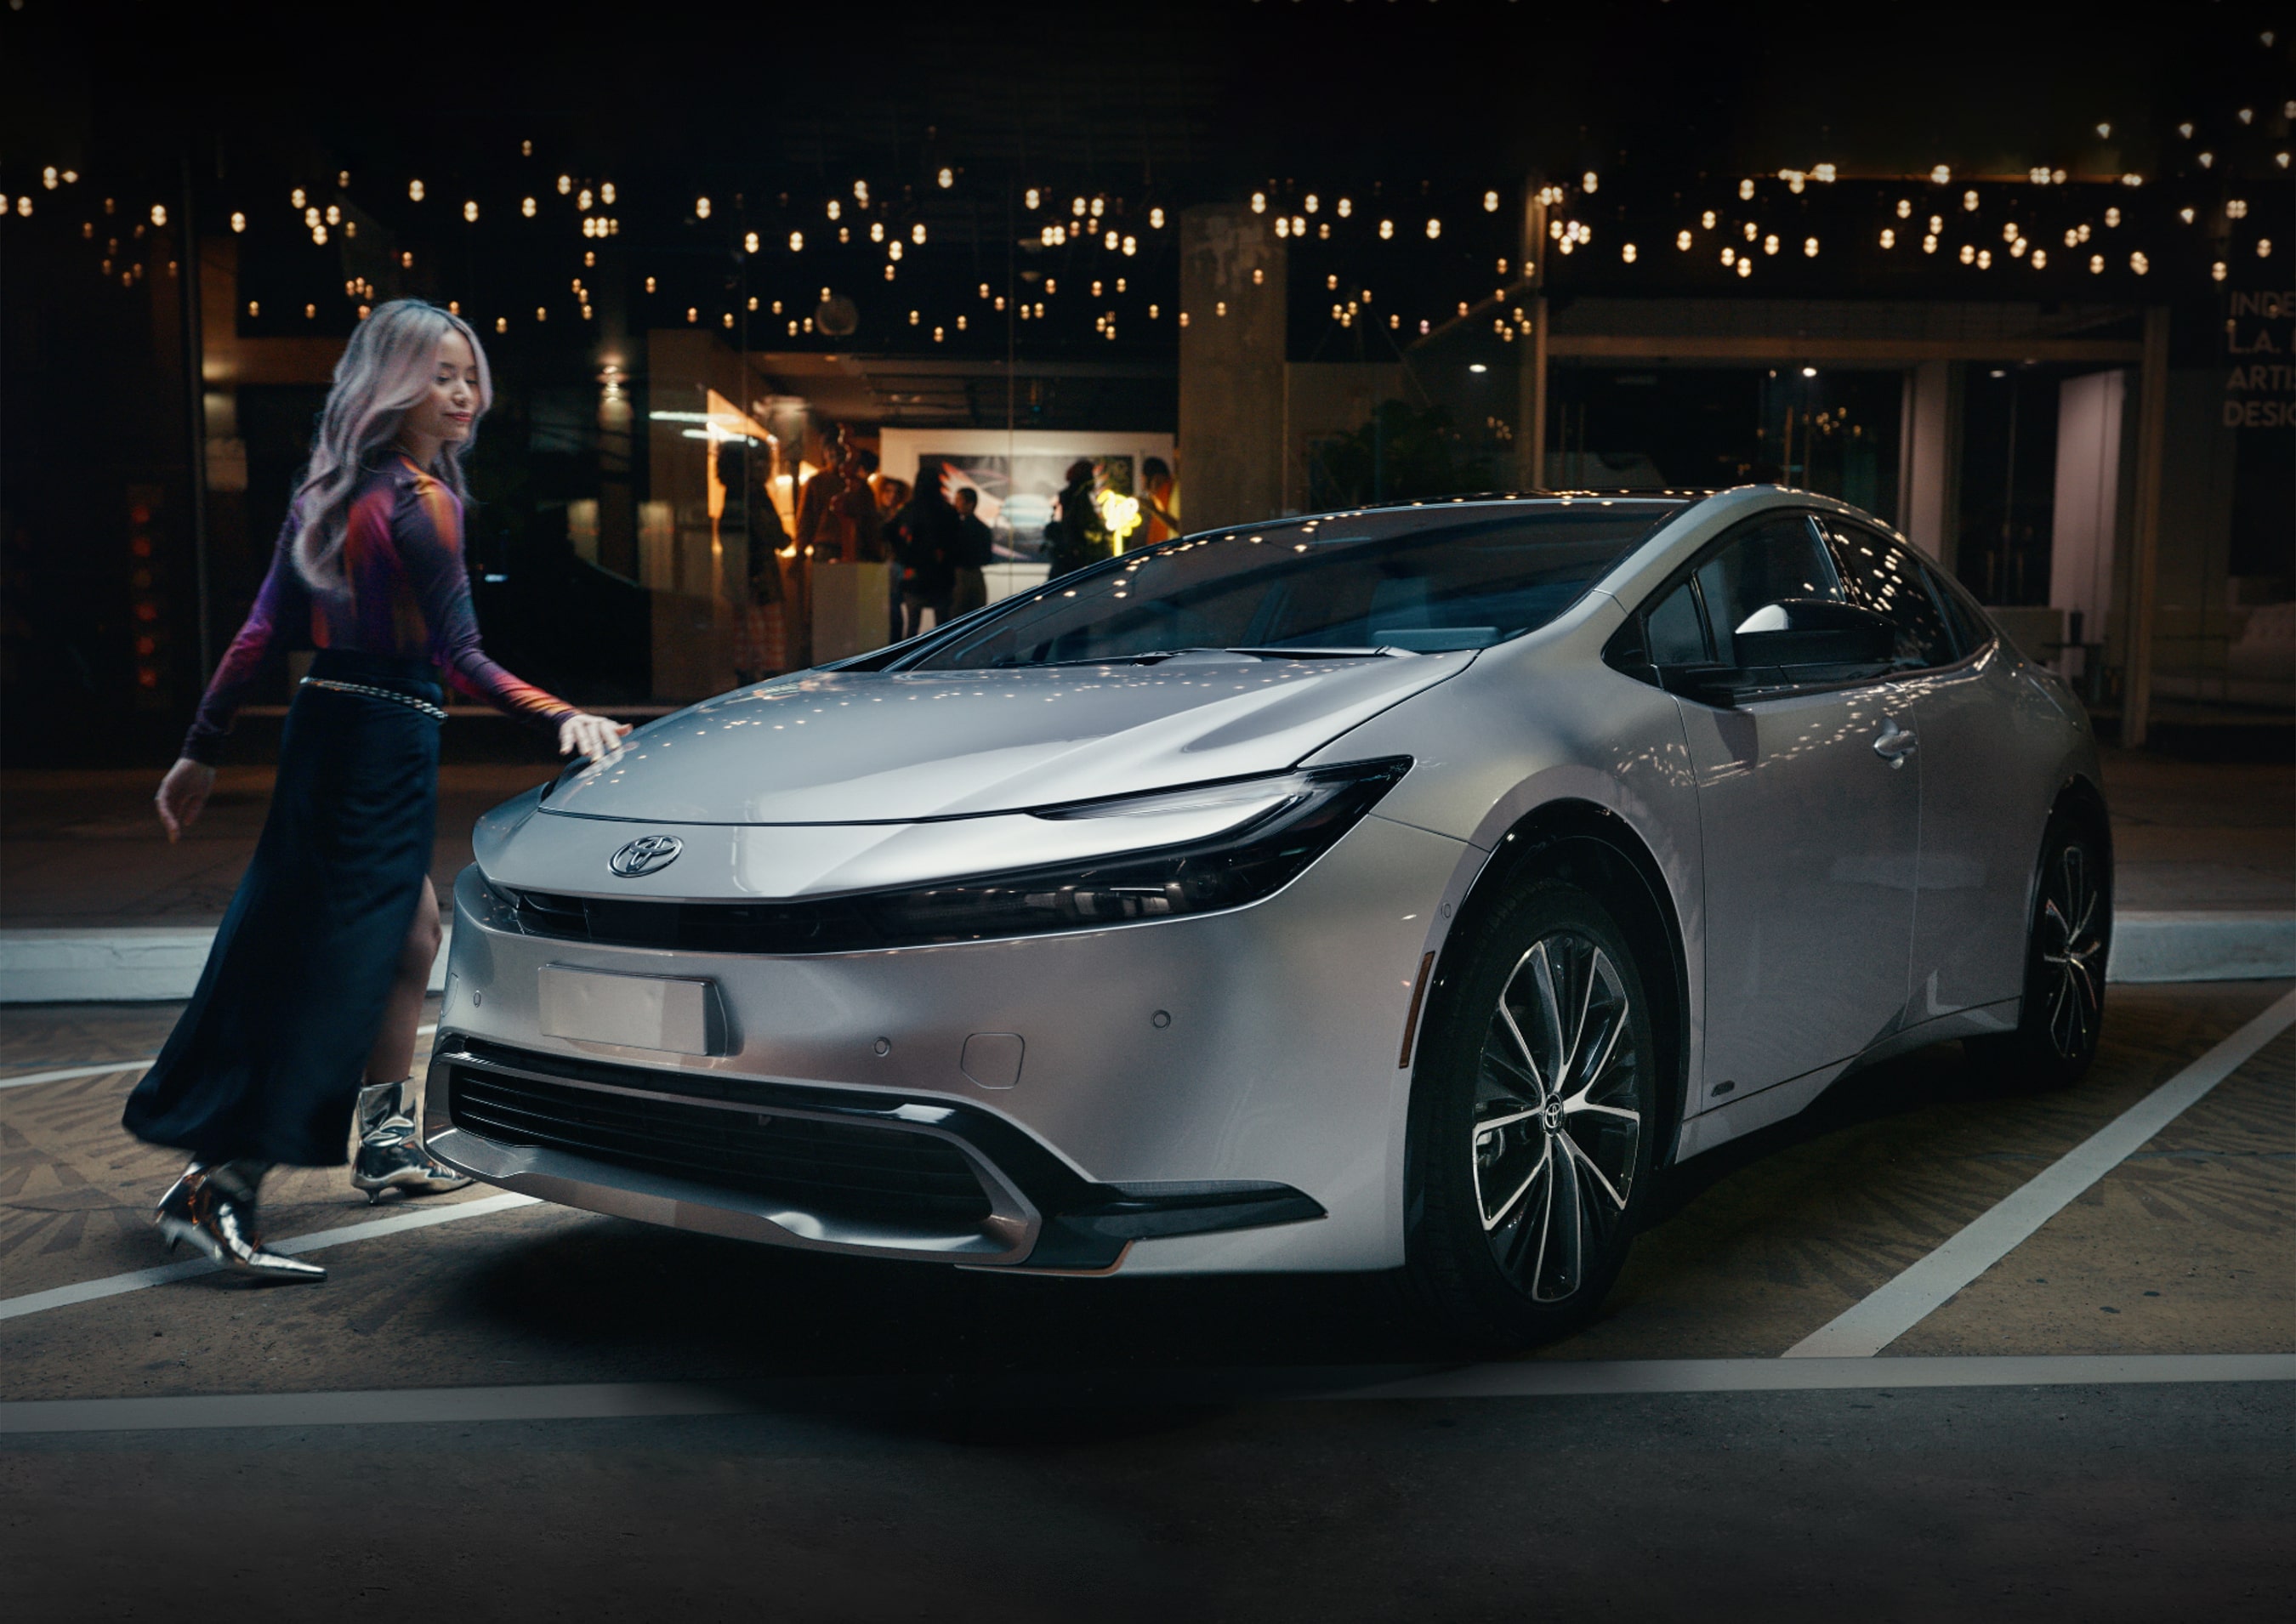 The spot “Reborn” was developed by InterTrend Communications to showcase the completely redesigned all-new 2023 Toyota Prius.